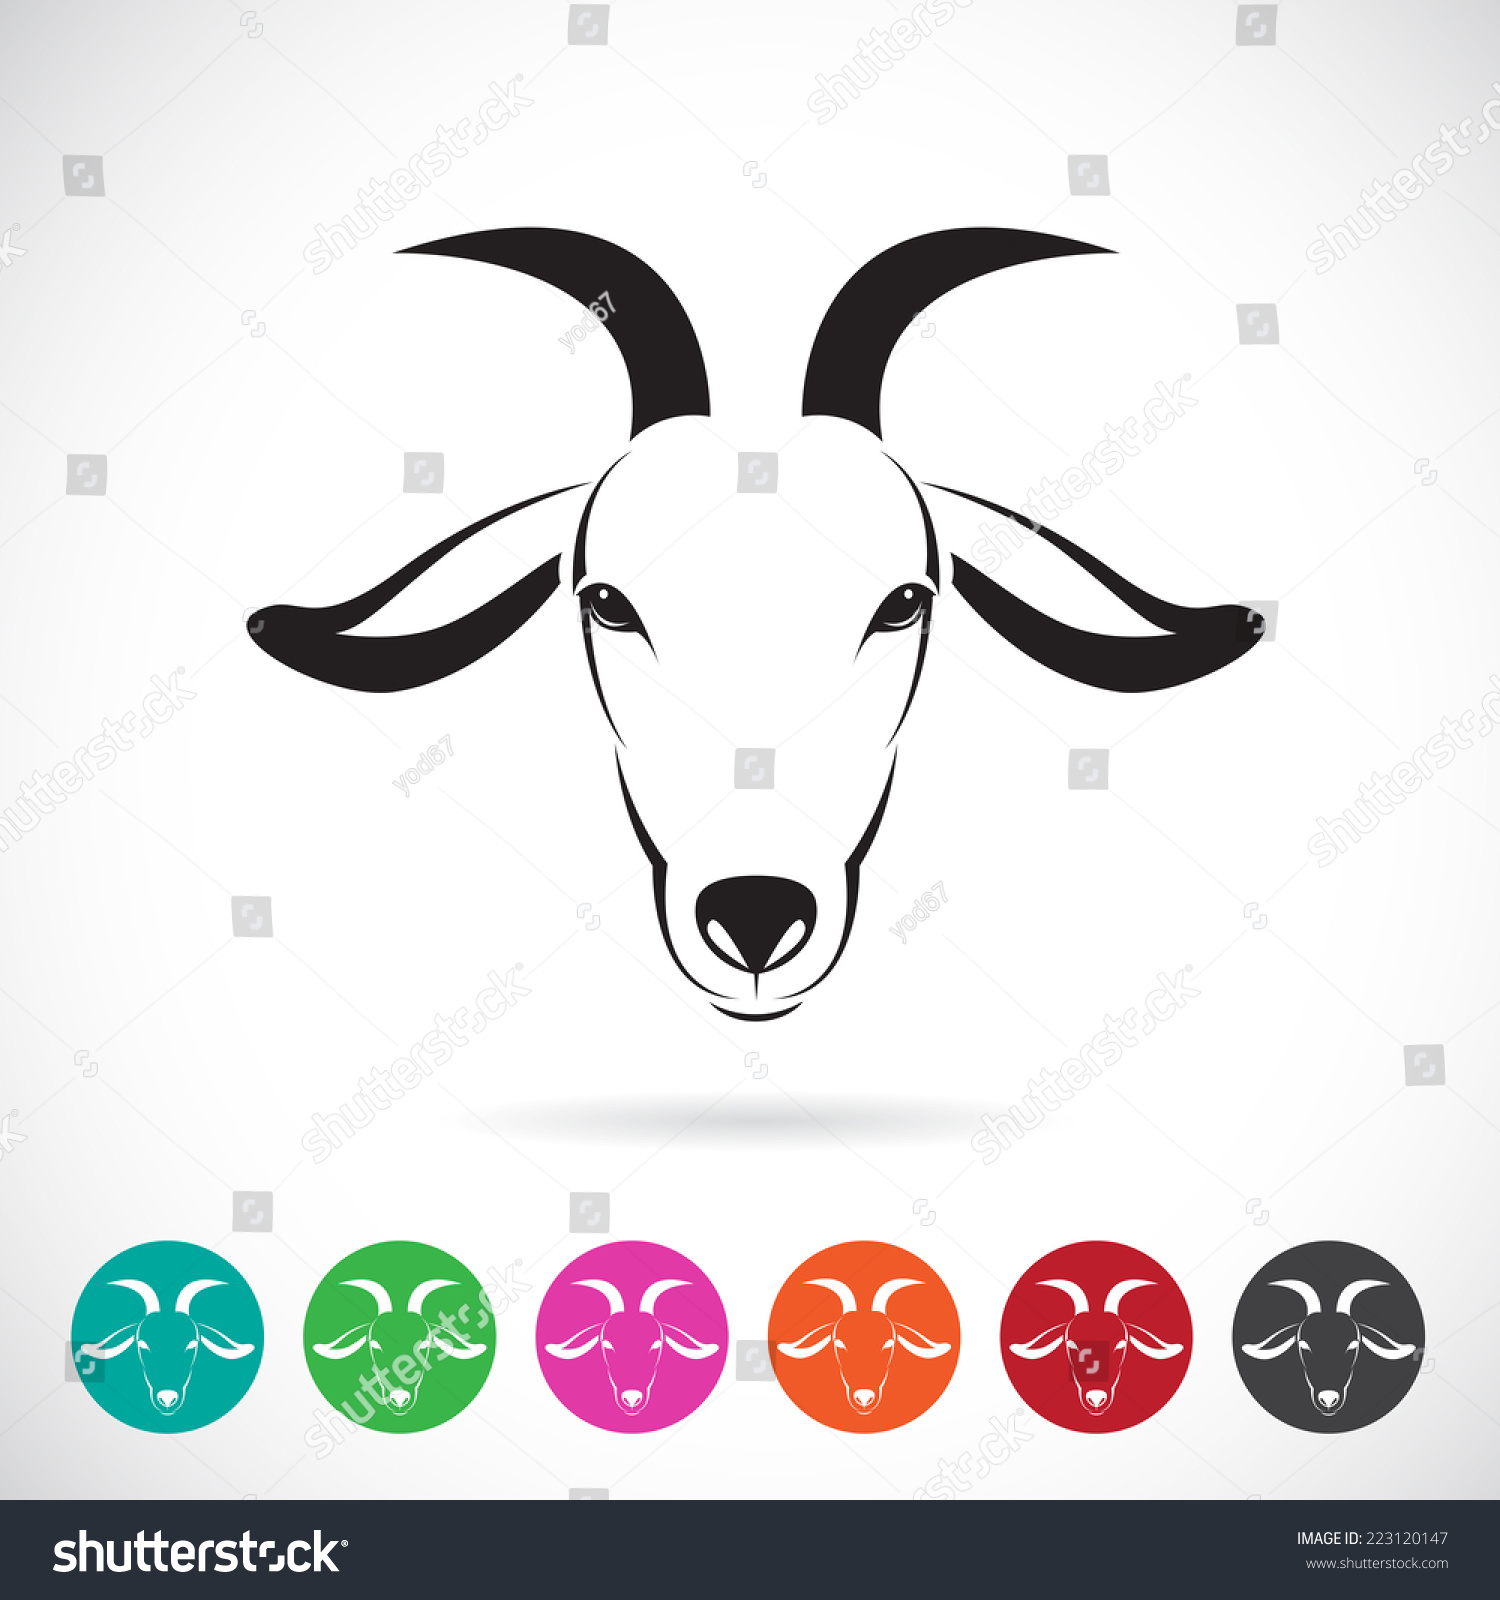 Vector Image Of An Goat Head On White Background - 223120147 : Shutterstock